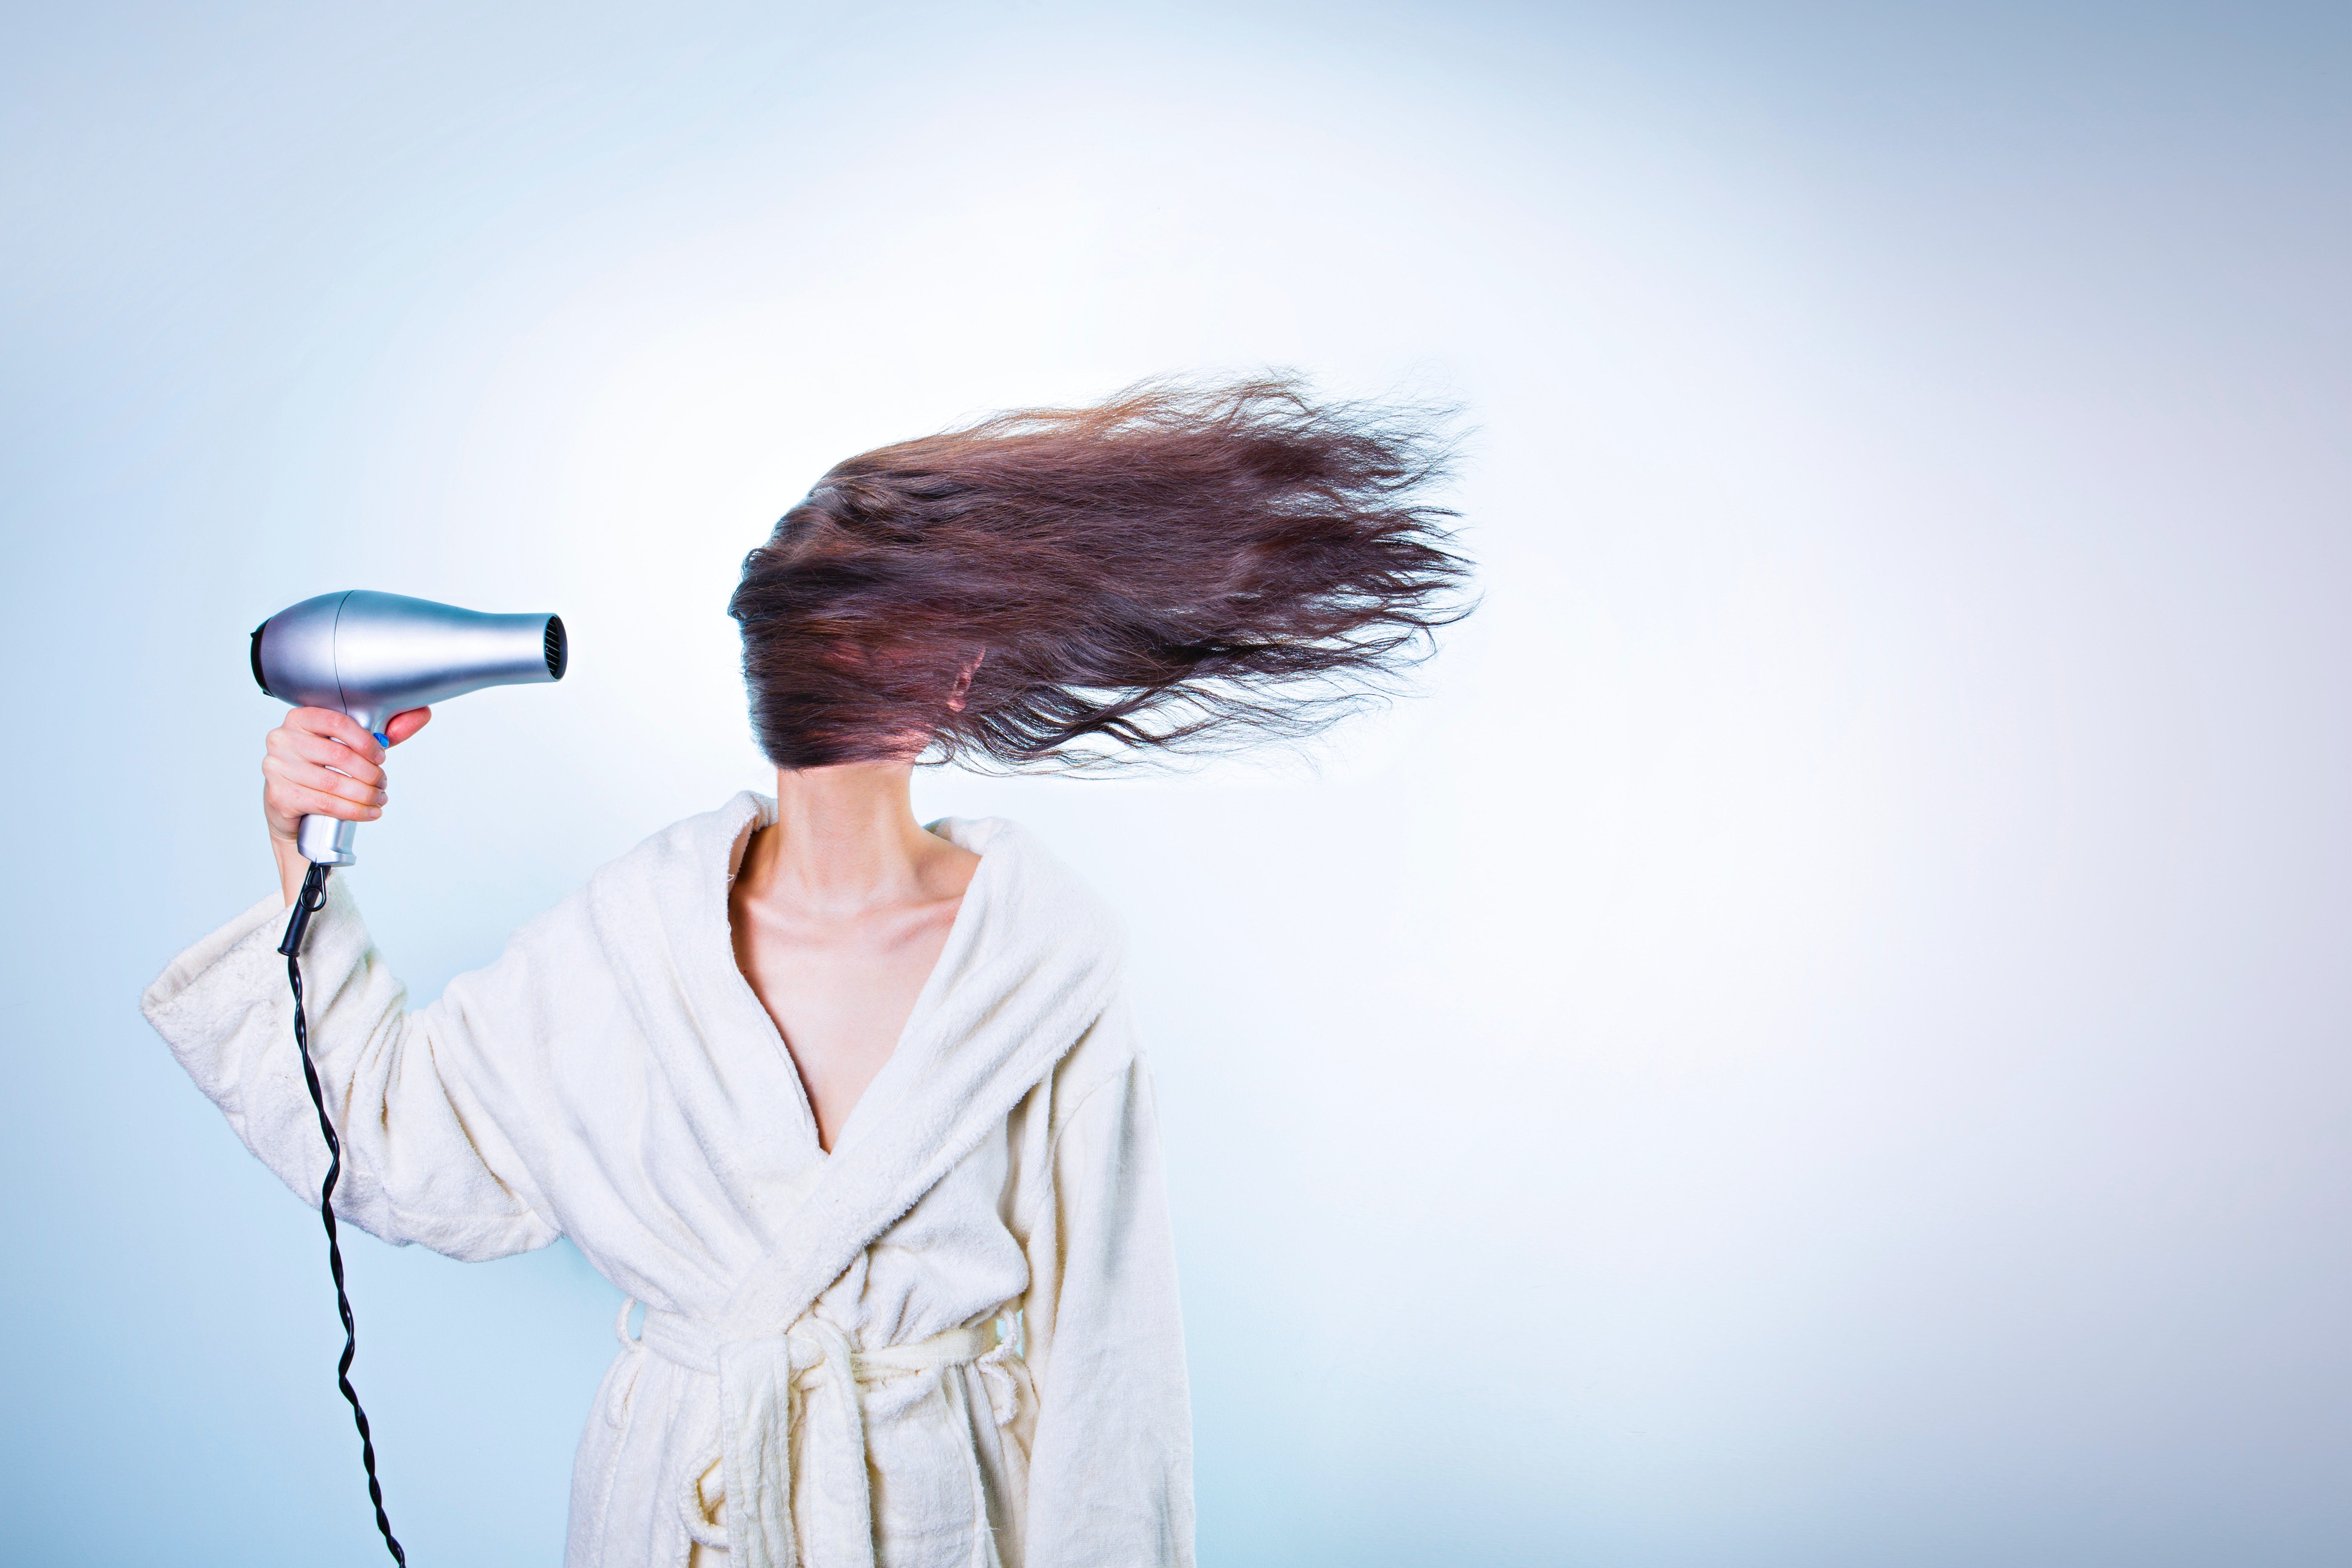 Woman using a hair dryer - heated styling tools damage hair growth